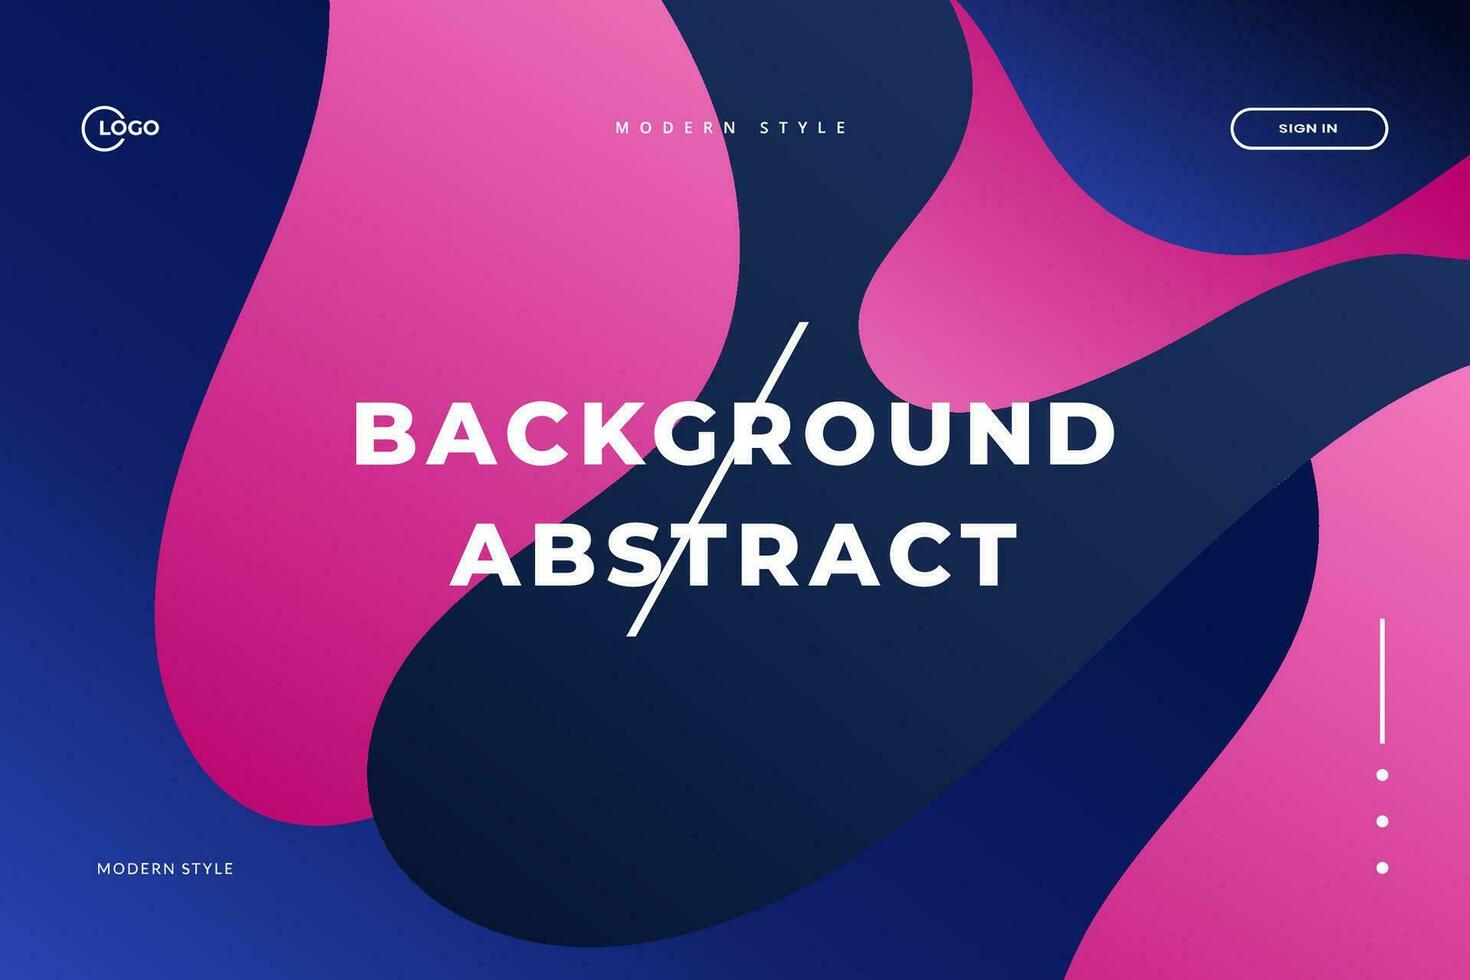 Abstract Background Wave Modern was created with a modern and minimalist aesthetic in mind. It's perfect for a landing page or web app, and would also make a great mobile app background vector